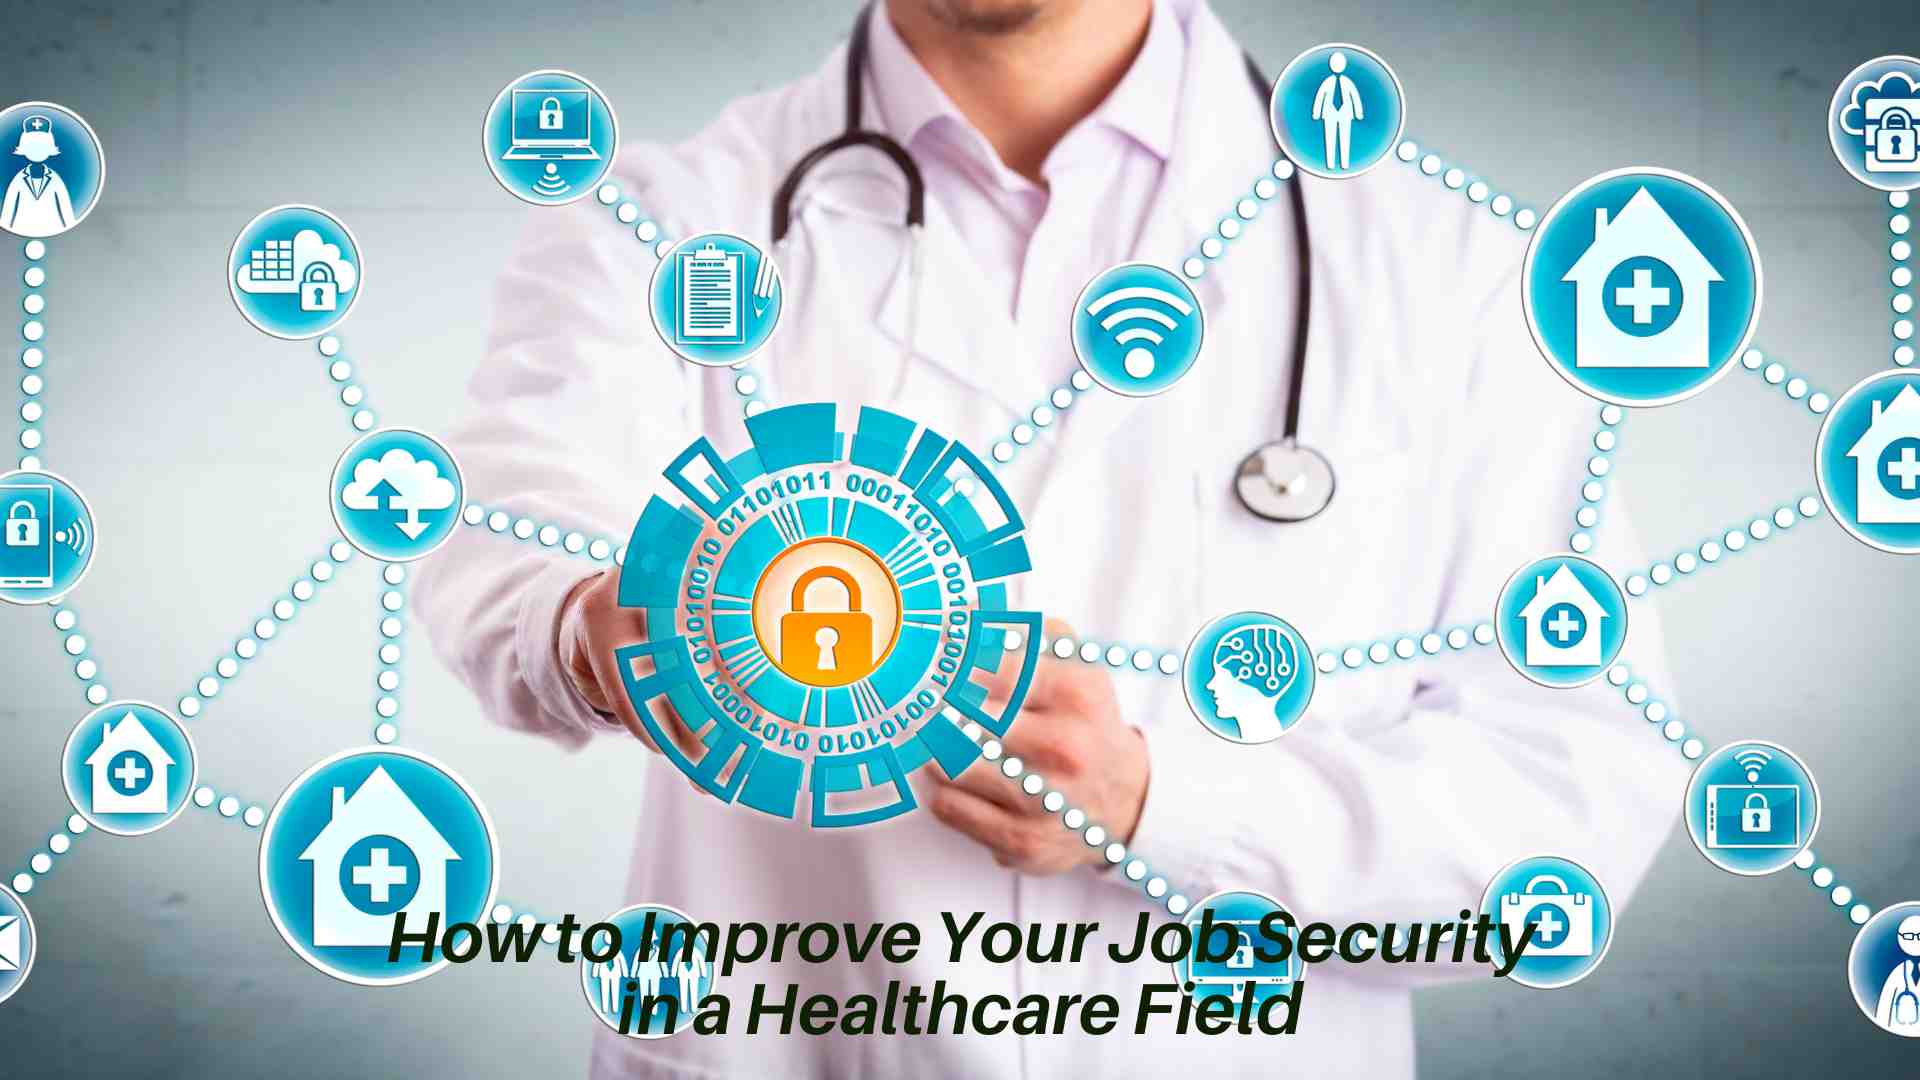 How to Improve Your Job Security in a Healthcare Field